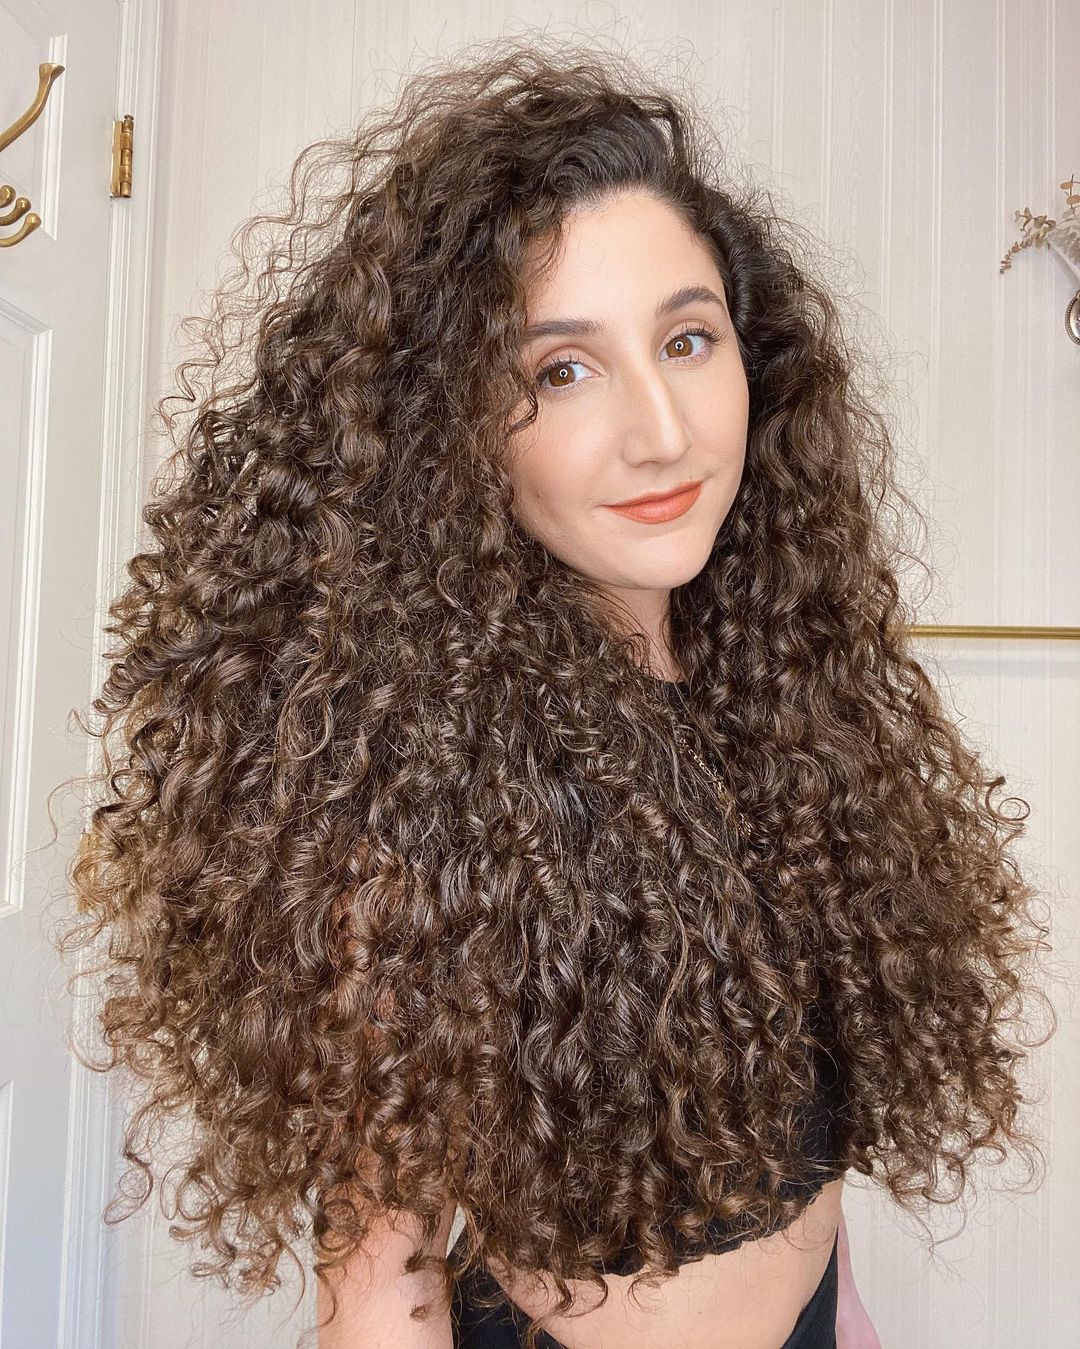 LOG Method for Curly Girls Explained in 3 Simple Steps